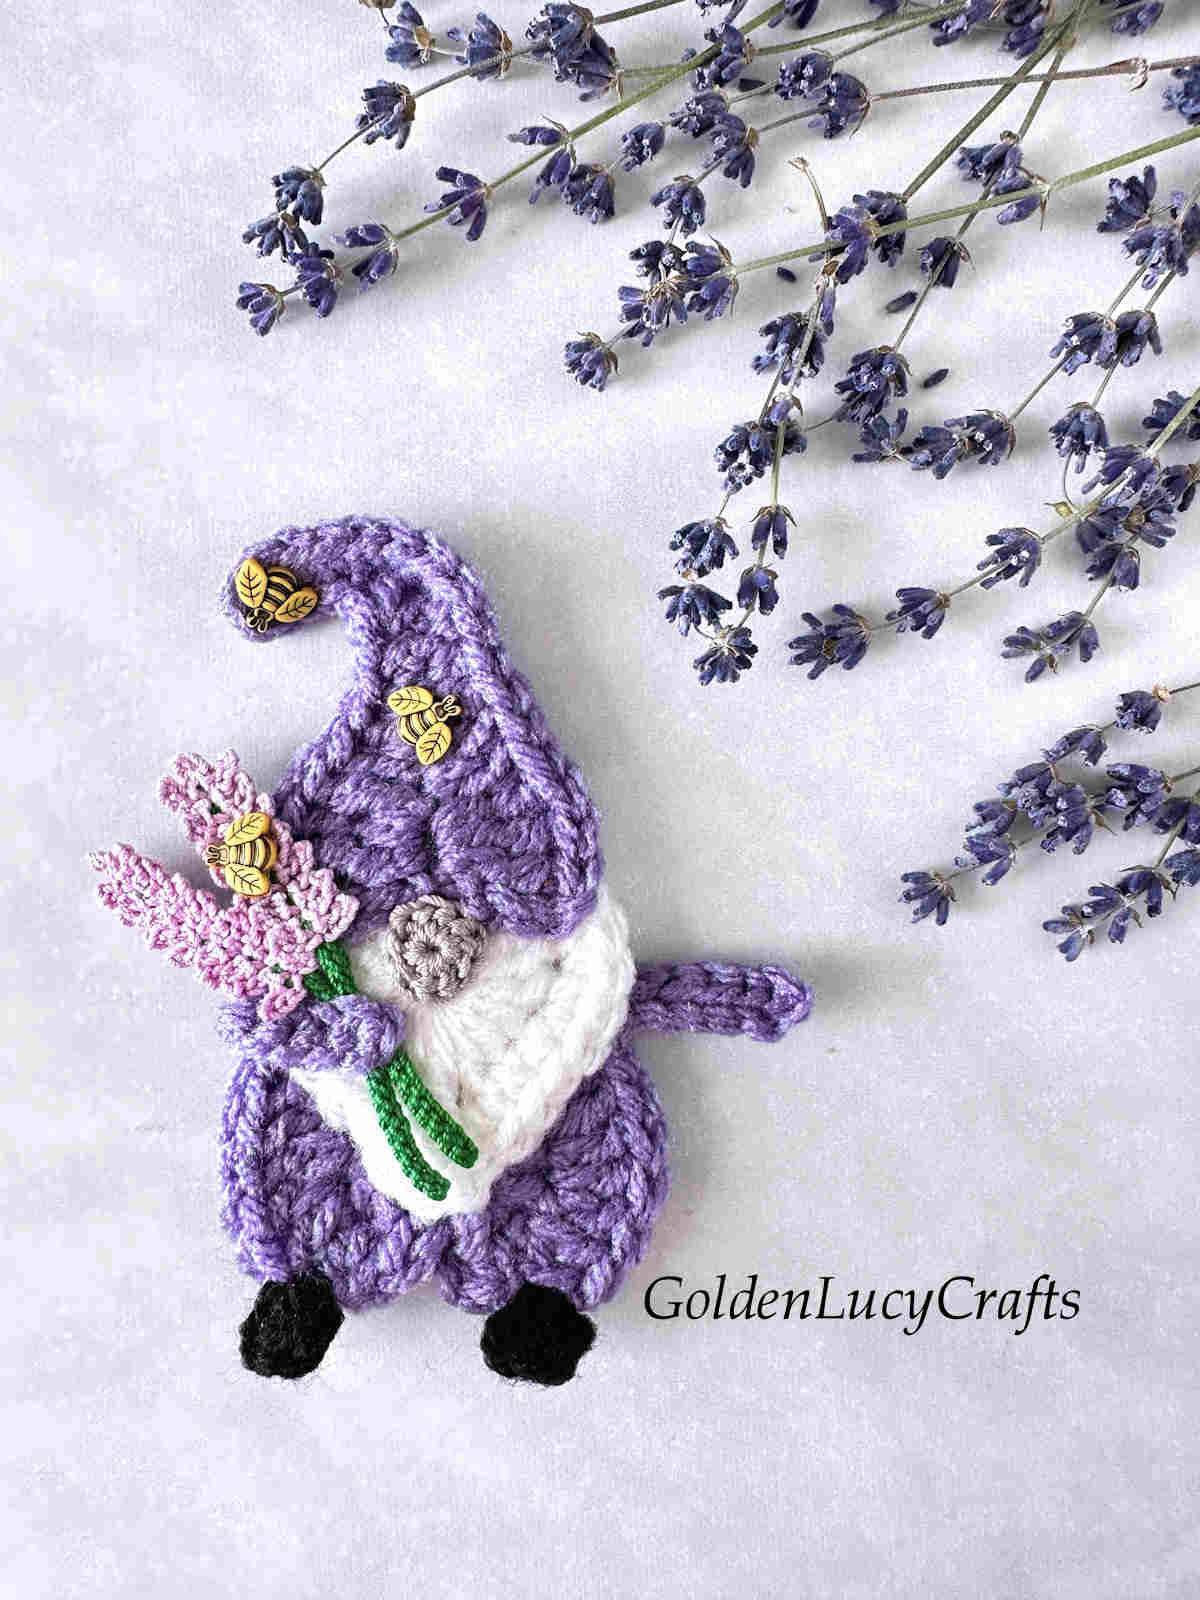 Crochet heart gnome with lavender embellished with bee buttons.